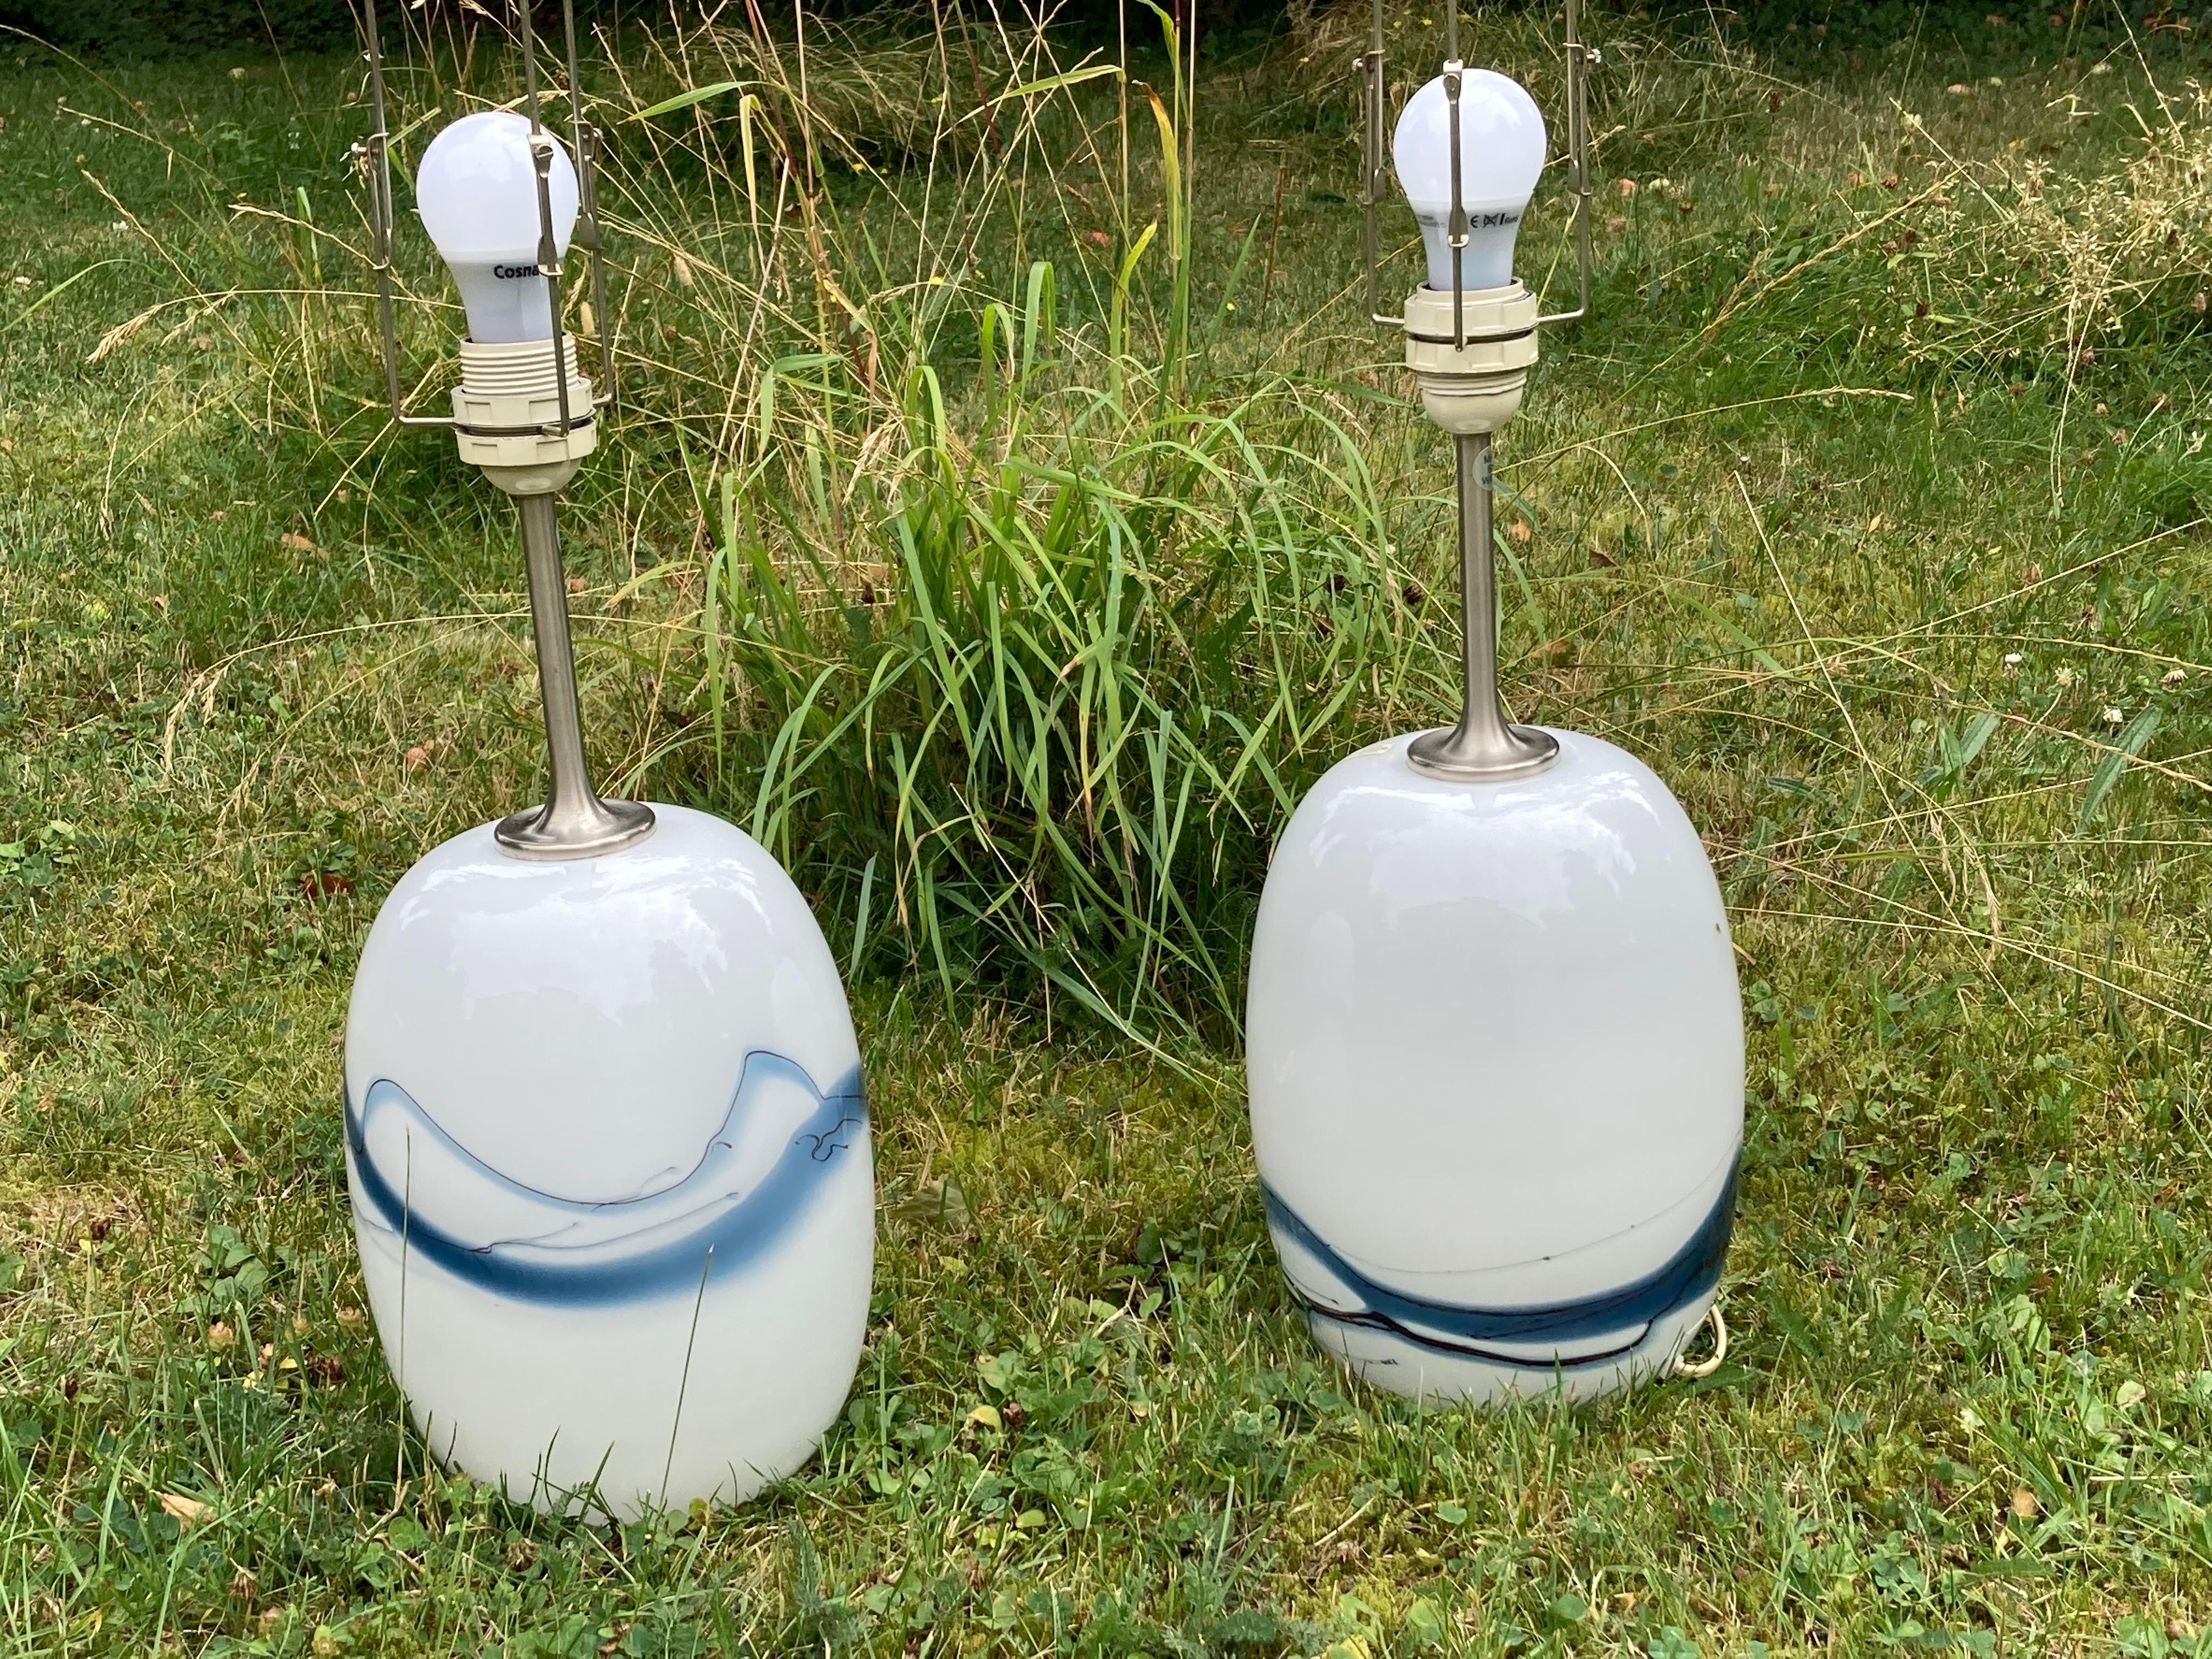 Two Holmegaard lamps with brushed steel fittings by Holmegaard, Denmark, 1984 in white with a variety of blue colors glass melt underlying the smooth clear glass designed by Michael Bang, 1984.
14